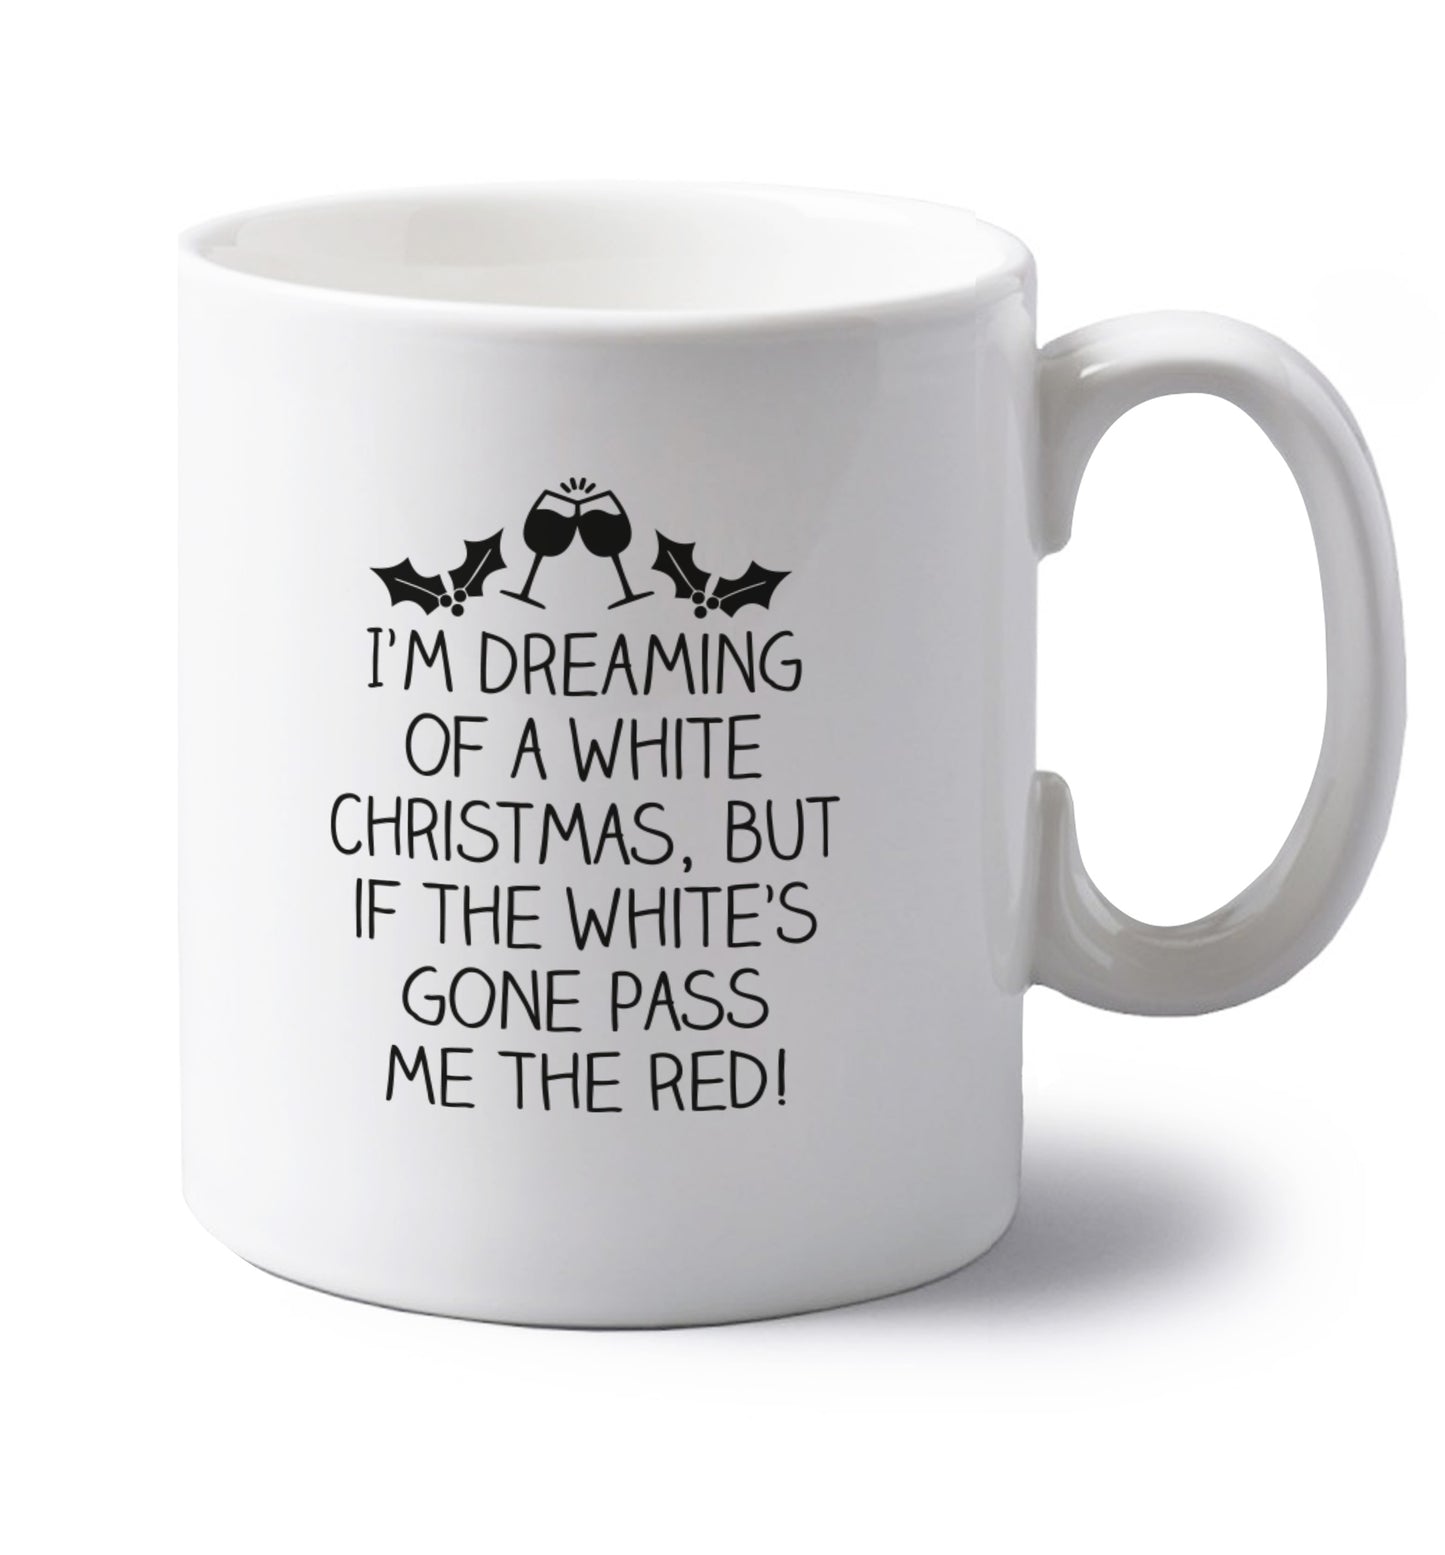 I'm dreaming of a white christmas, but if the white's gone pass me the red! left handed white ceramic mug 